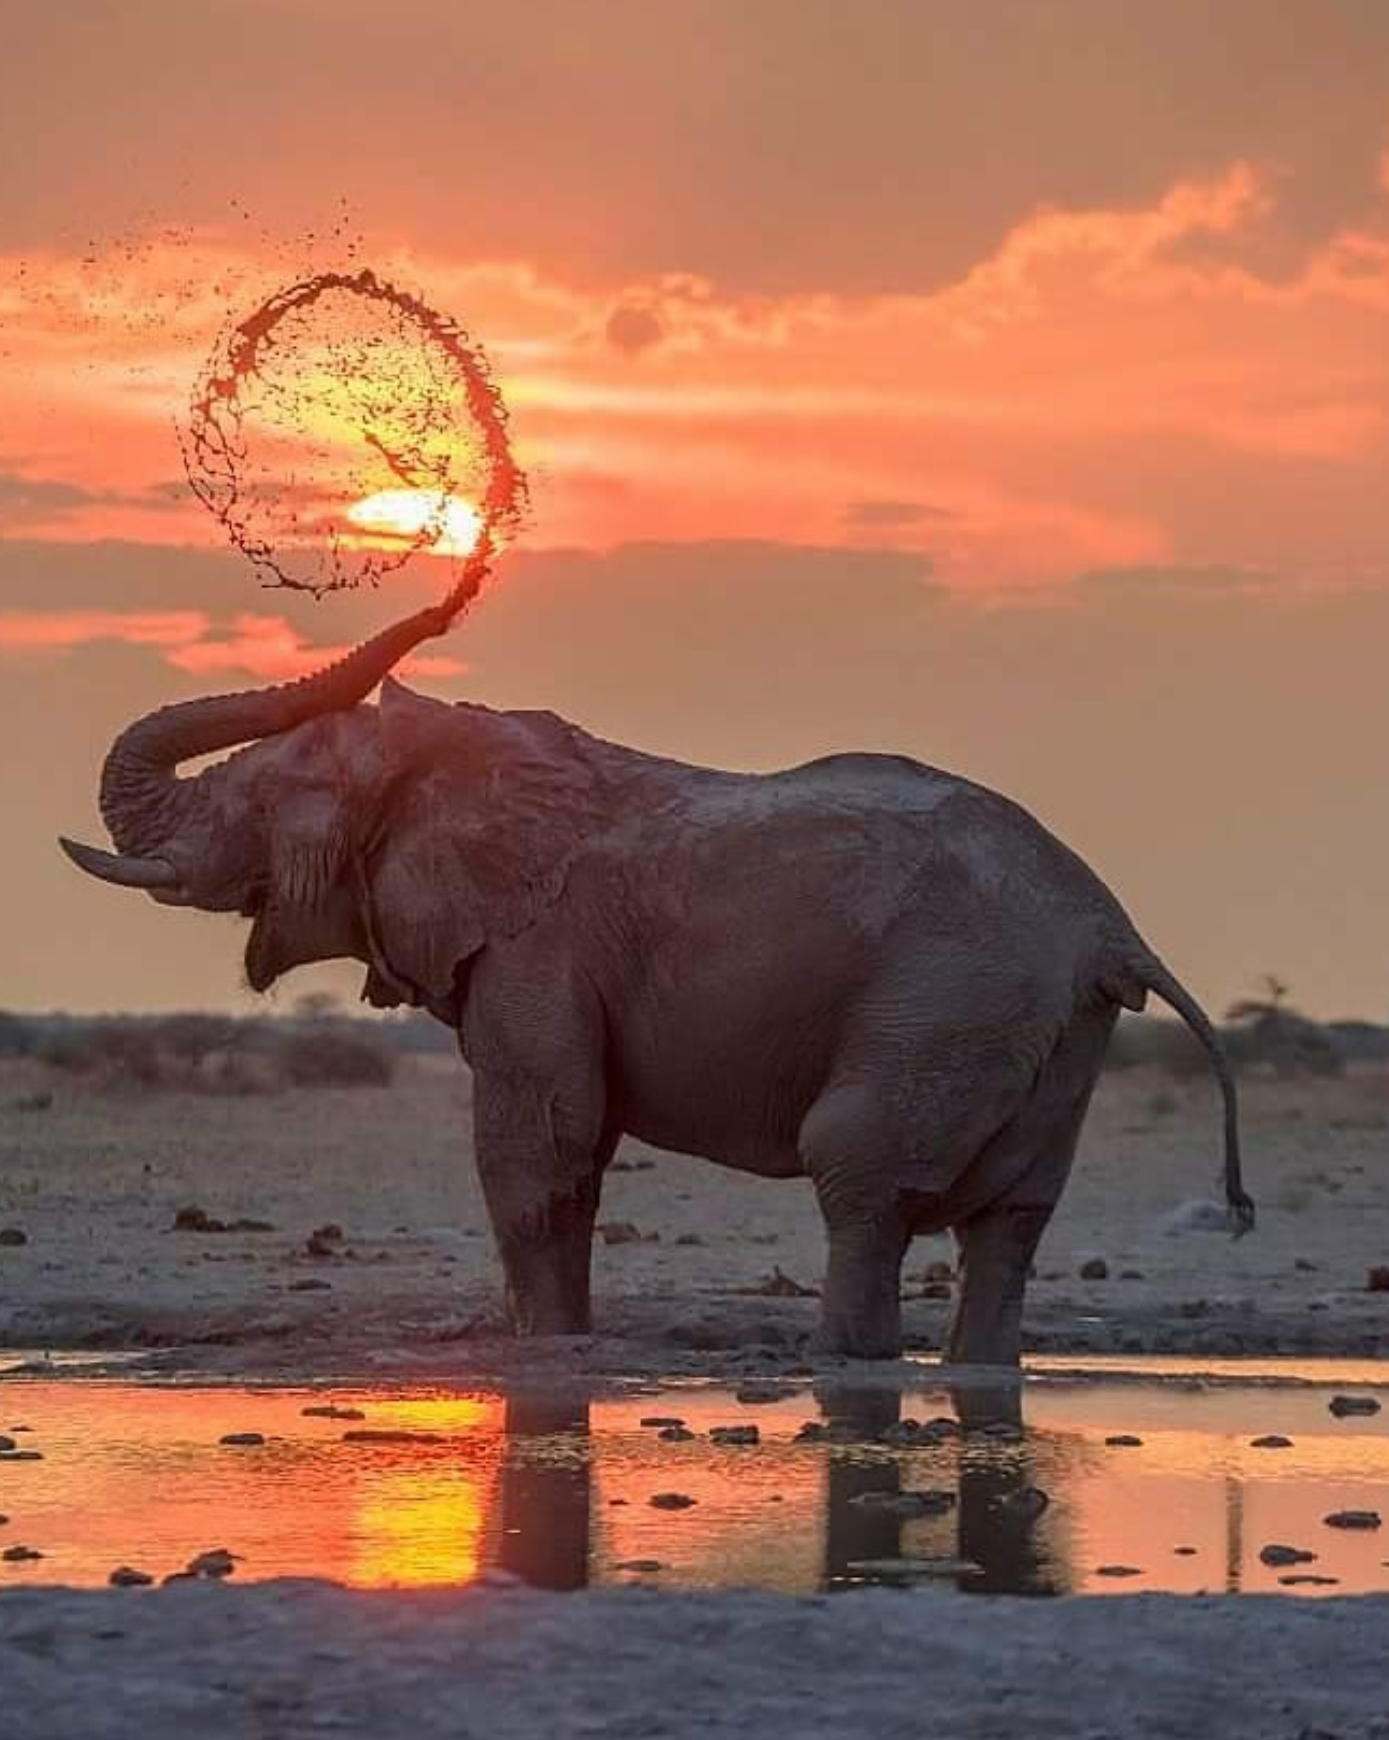 This elephant could be in a shampoo commercial. - Elephants, Water, Trunk, Bathing, Advertising, Shampoo, The photo, Spray